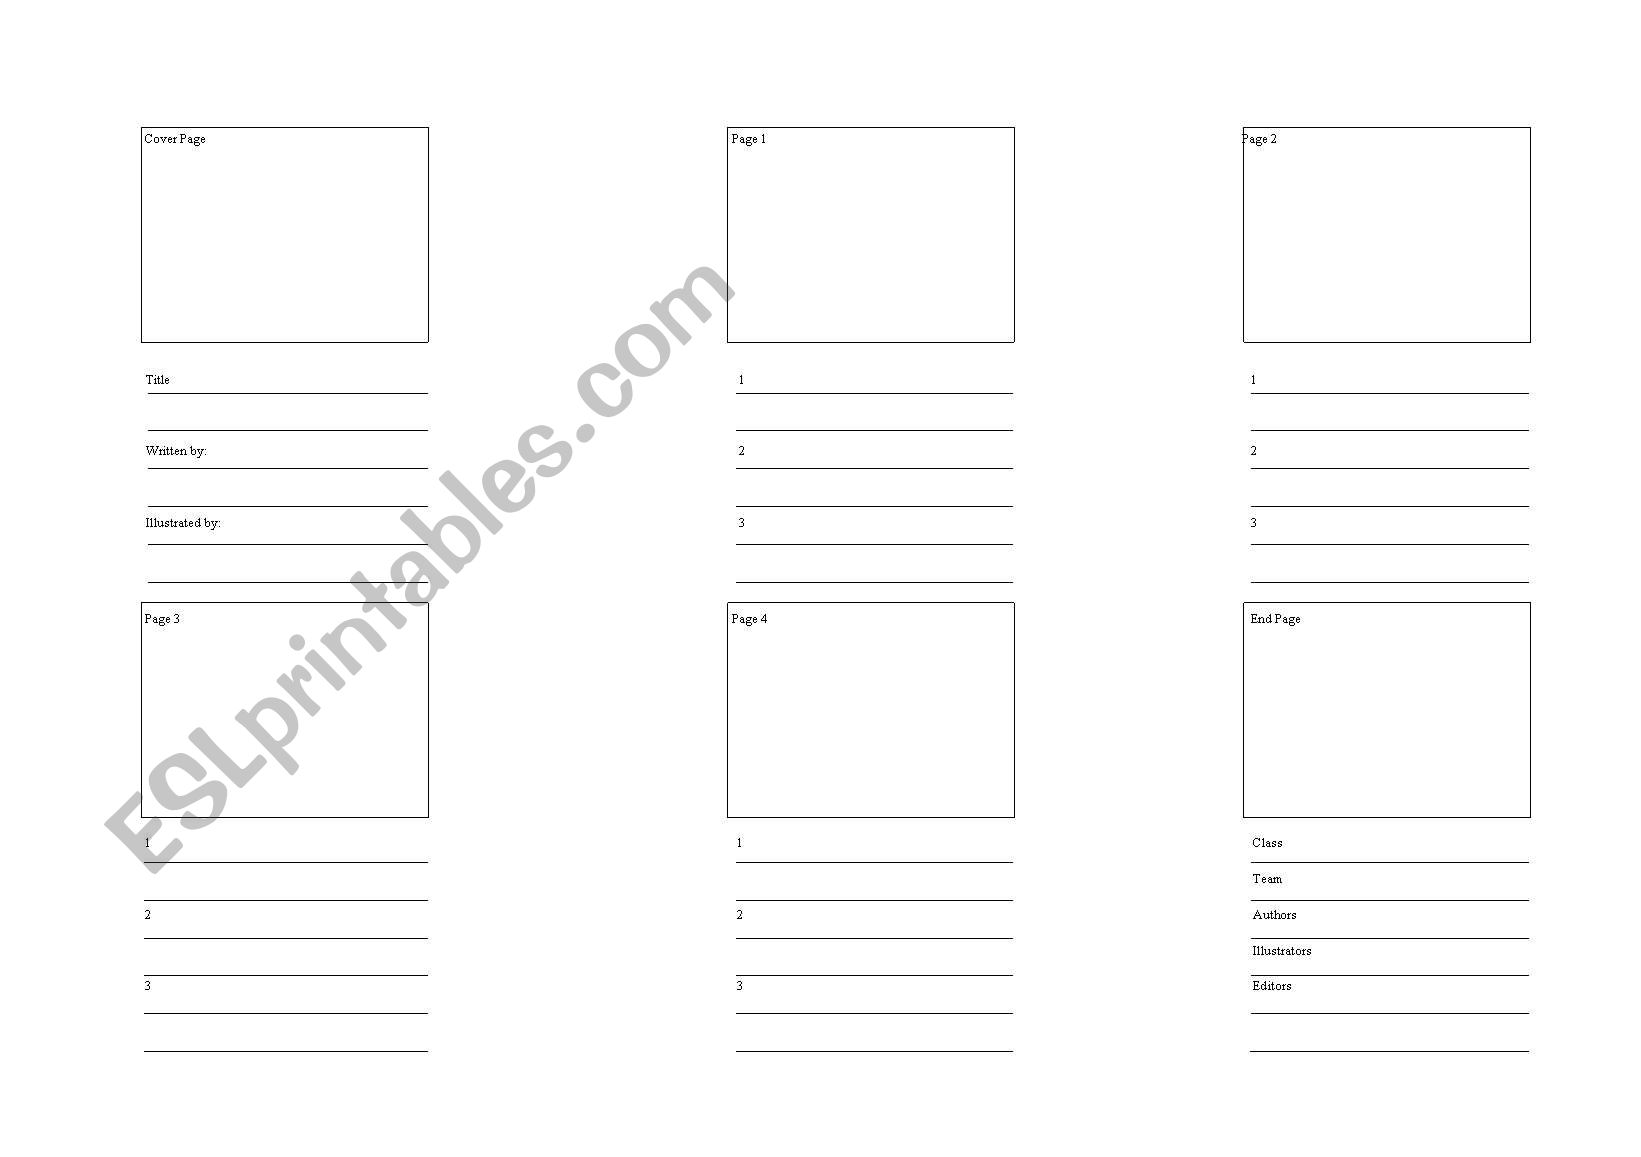 Picture Book Storyboard (4-Page Book)